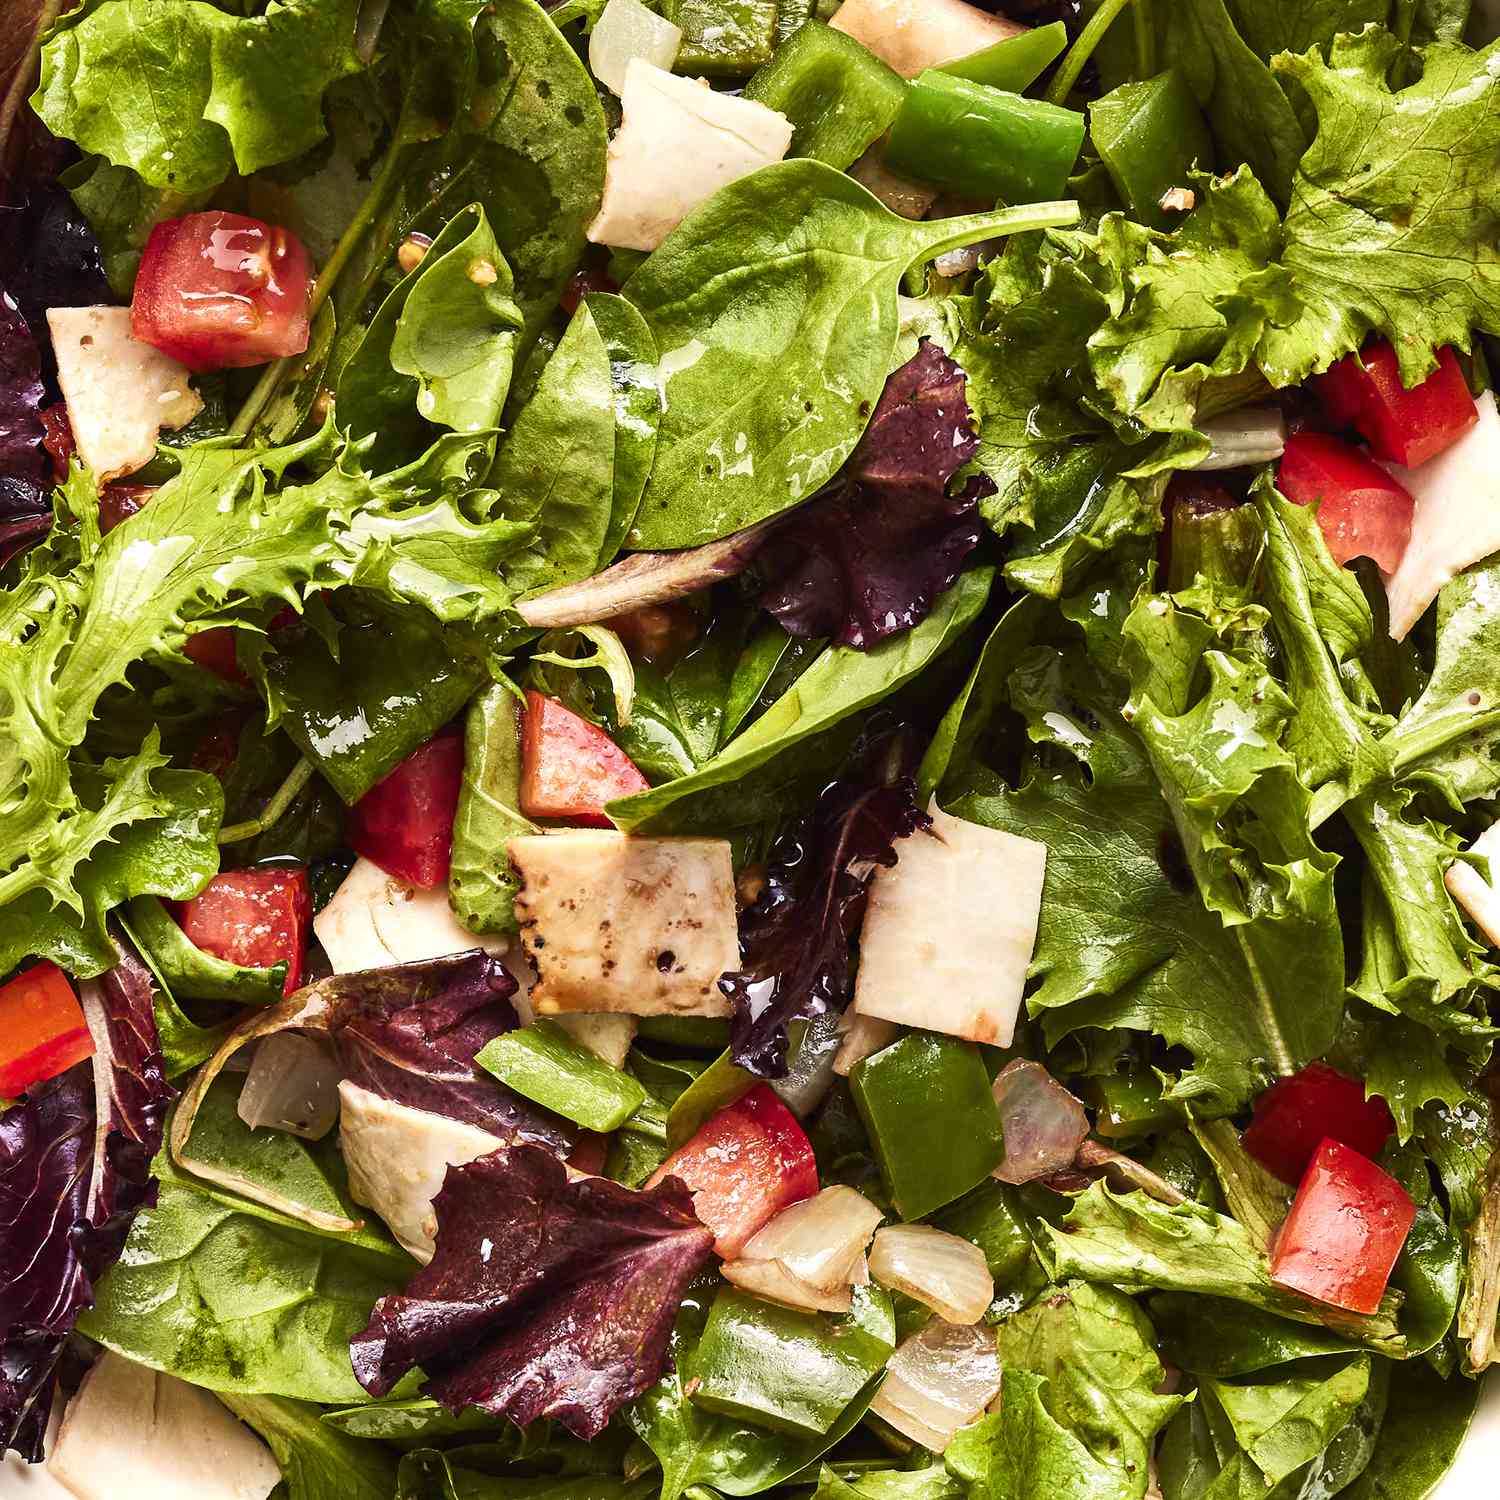 Salad Greens: Our Favorite Types & How To Use Them